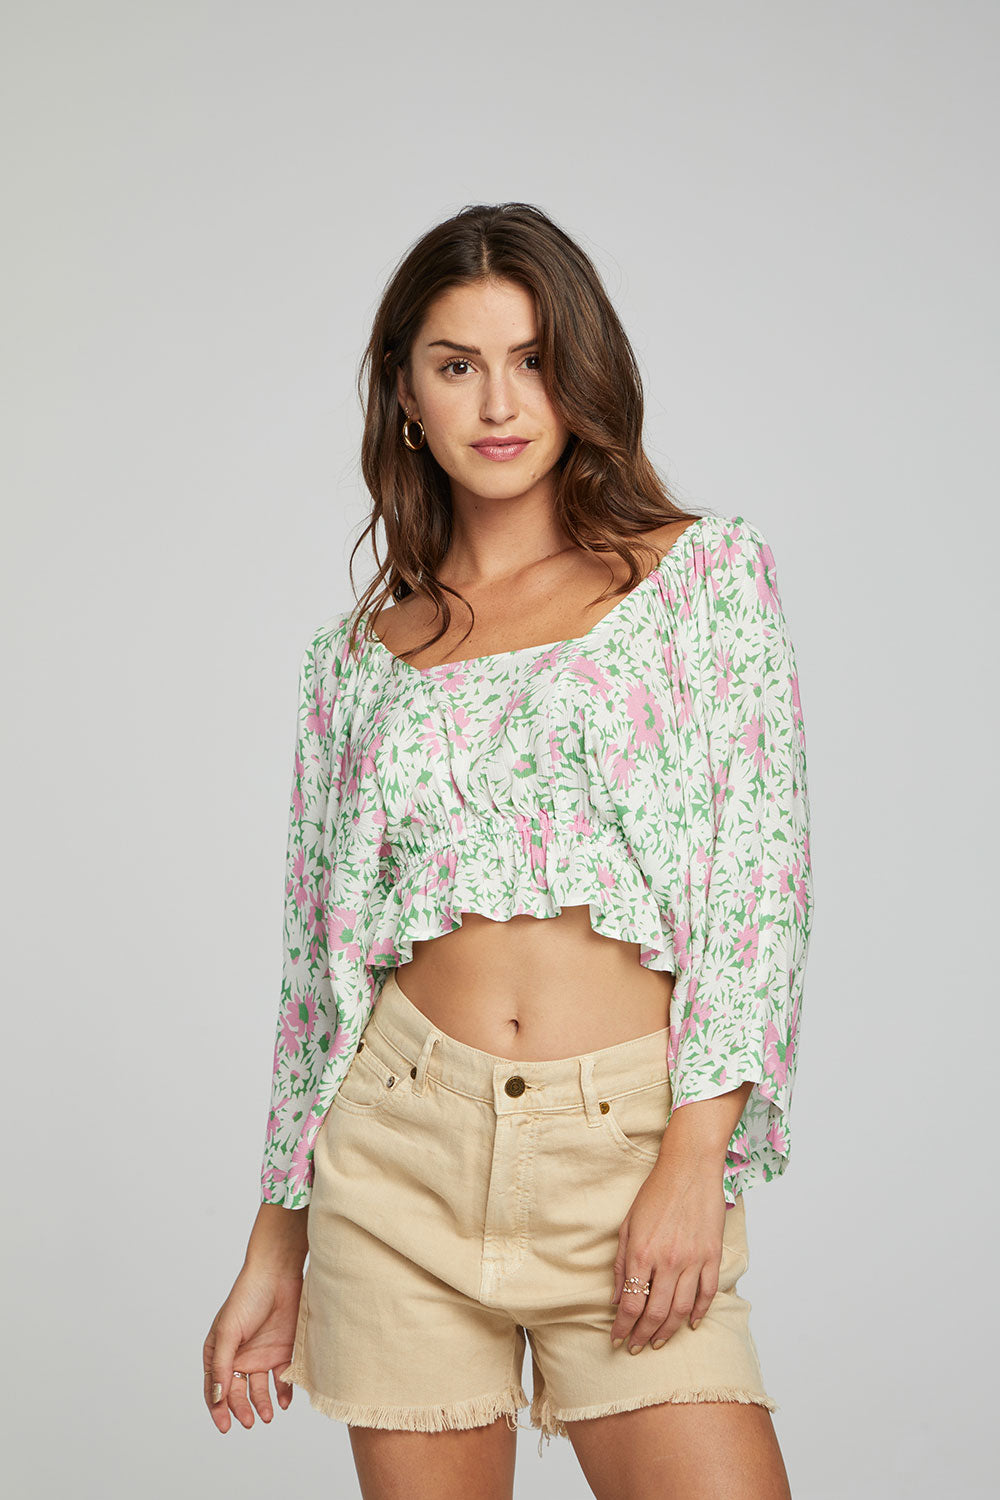 Monarch Crop Top - Grass Daisy Floral WOMENS chaserbrand